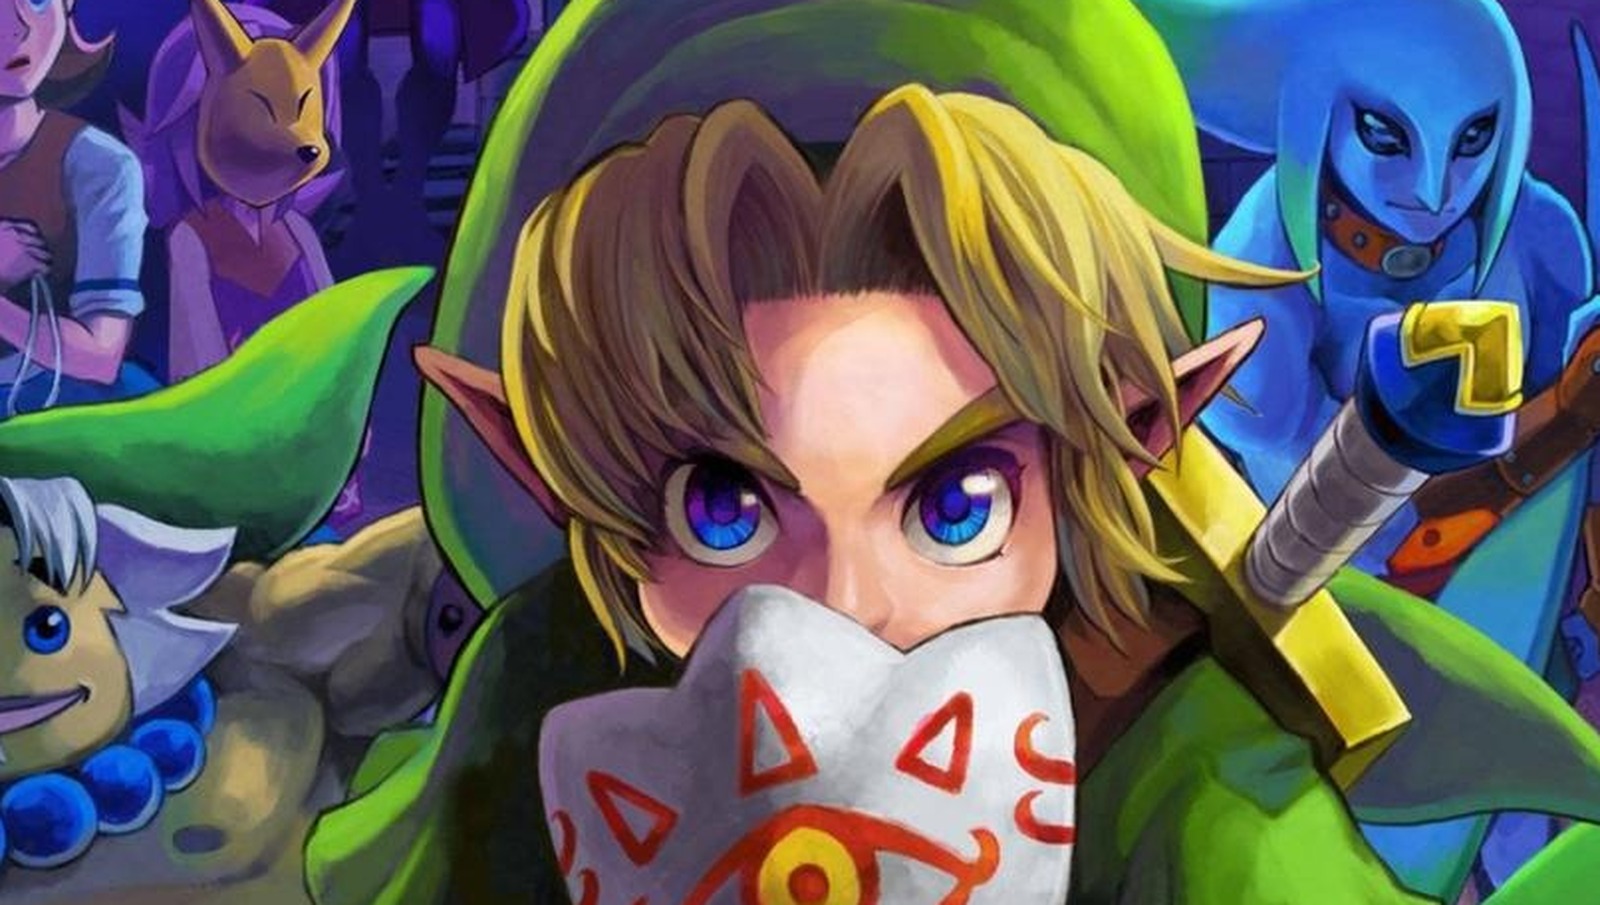 Ocarina of Time is Coming To Nintendo Switch? New Rumor!